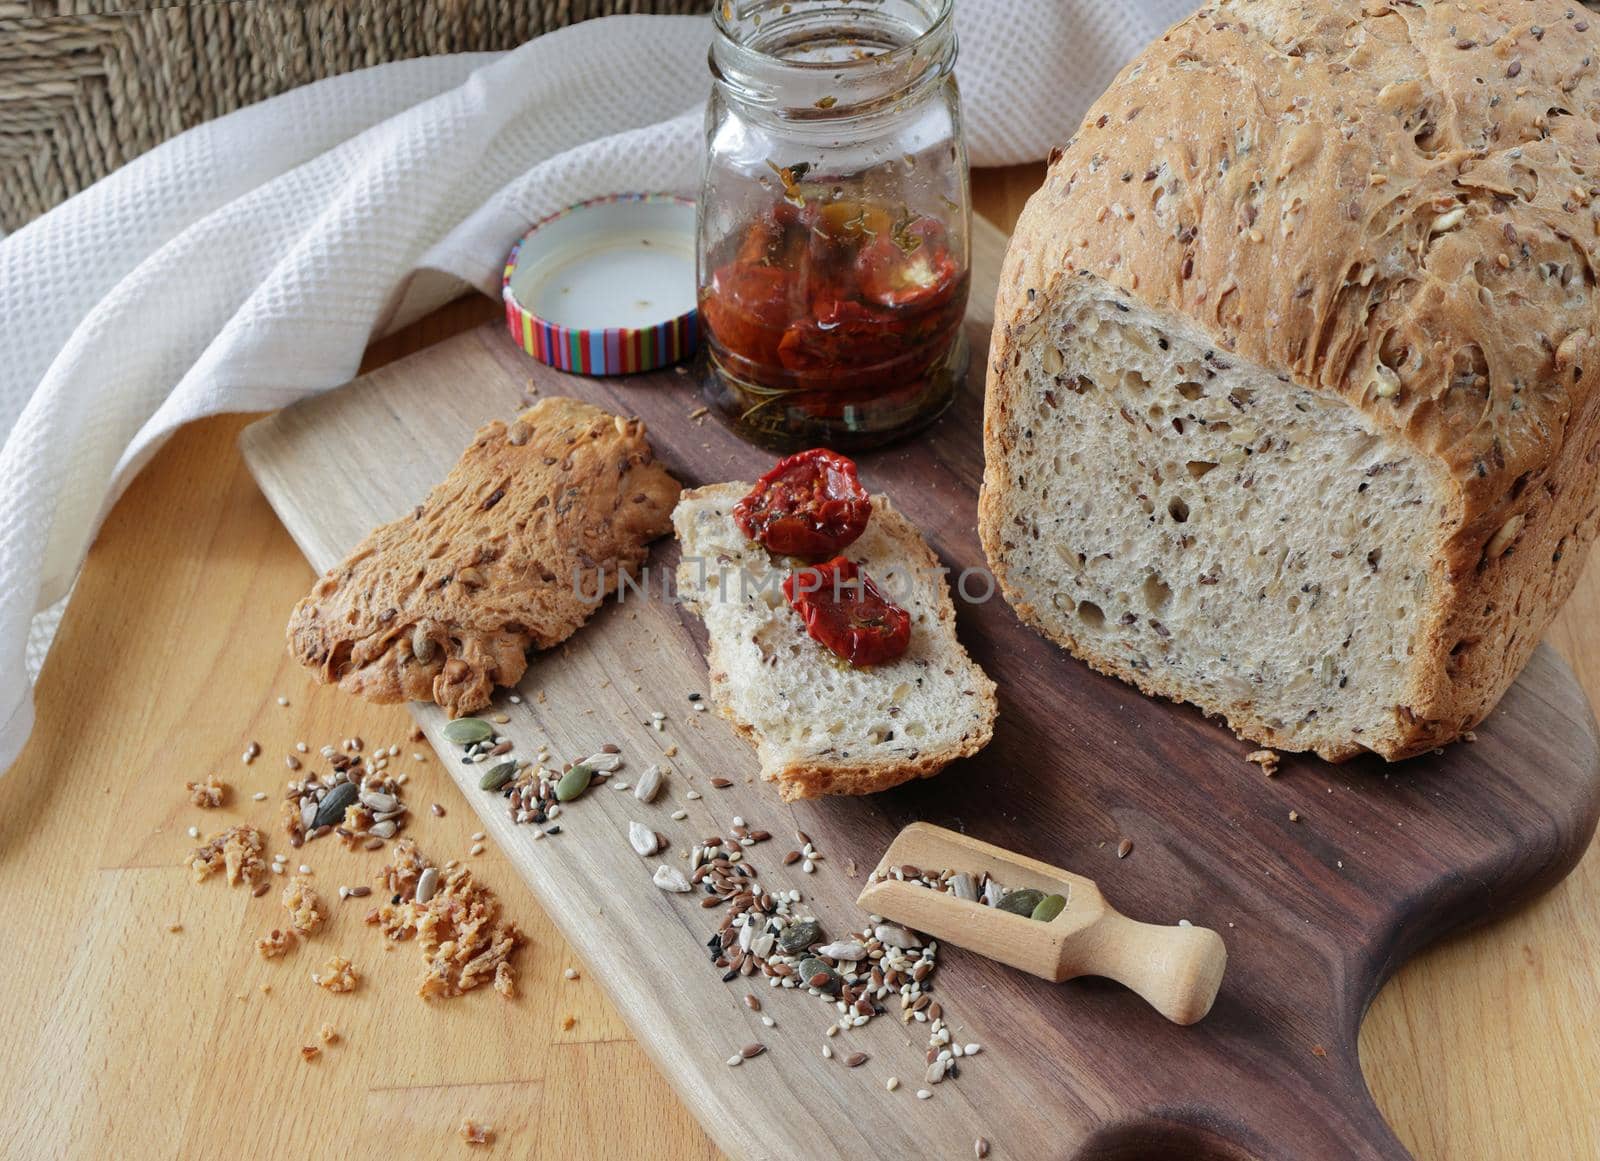 Sliced rye bread on cutting board. Whole grain rye bread with seeds. loaf of homemade whole grain bread and a cut off slice of bread. A mixture of seeds and whole grains. Healthy eating